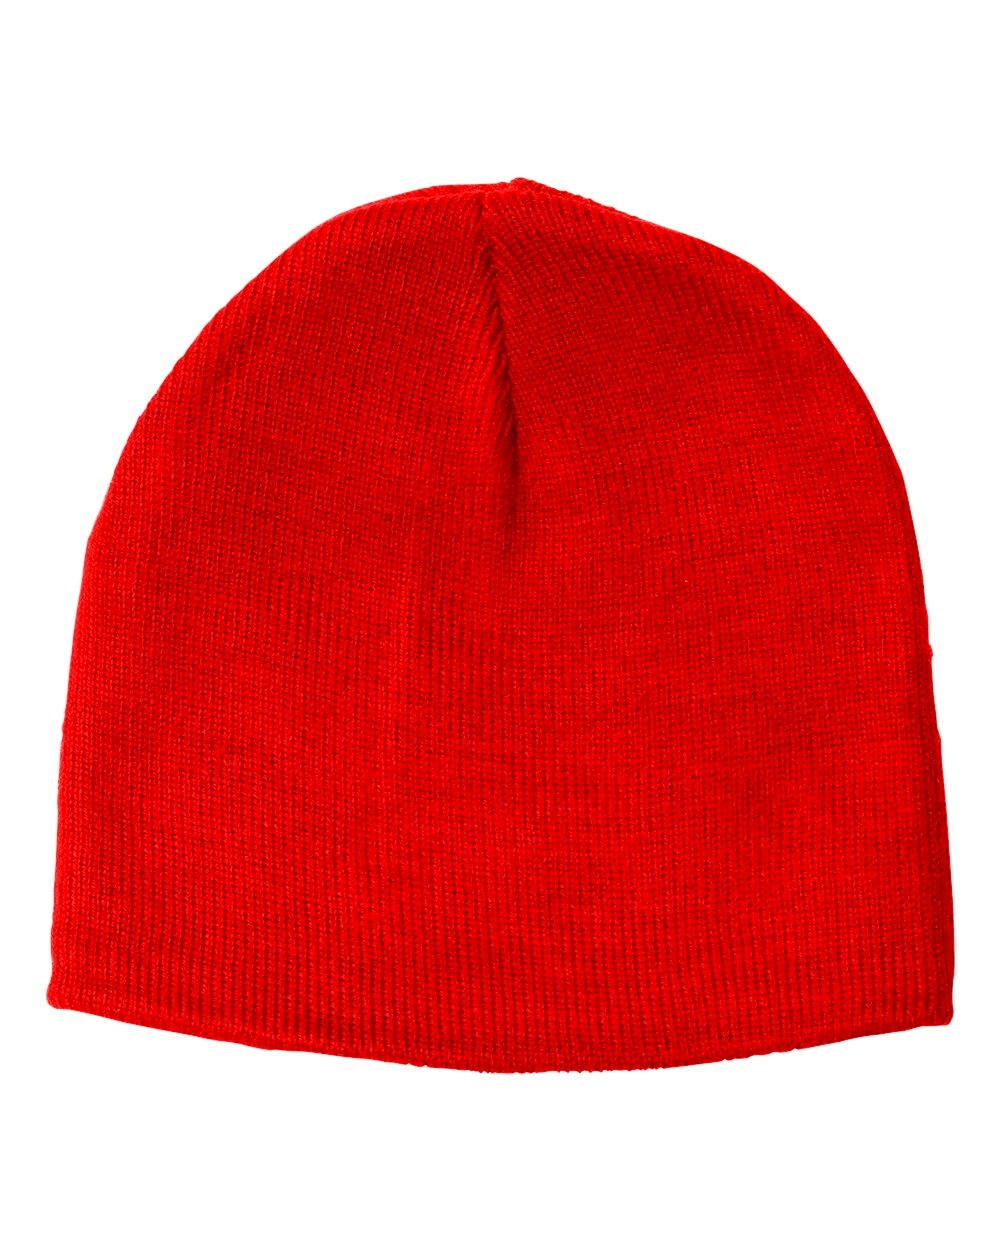 8.5" Knit Beanie Embroidery Blanks - Red